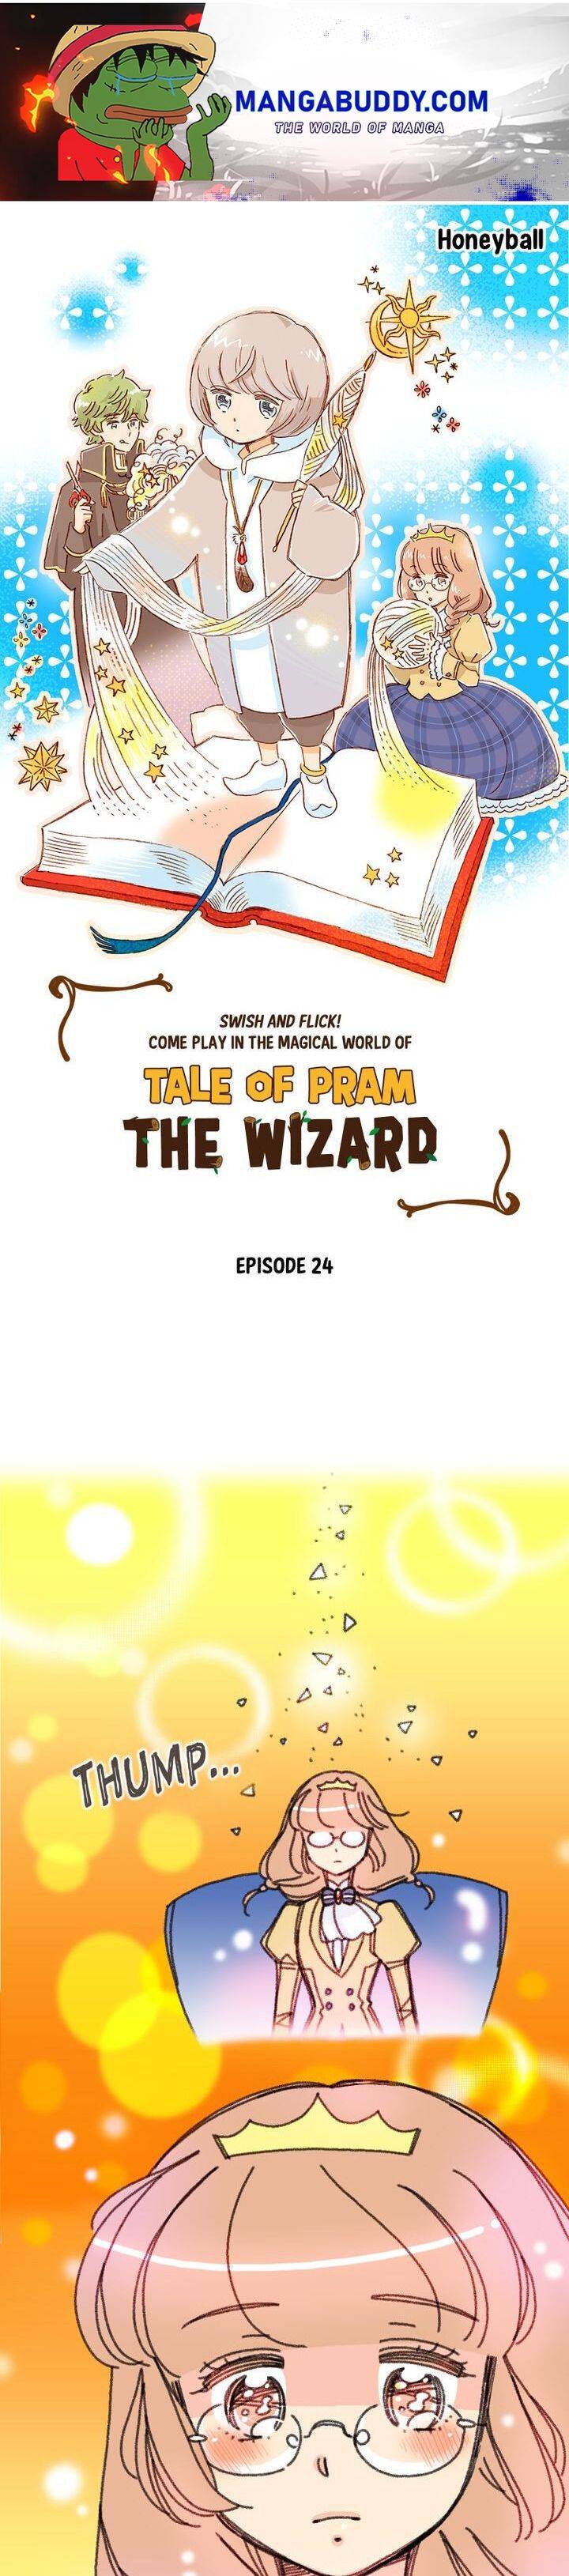 Tale of Pram the Wizard Chapter 24 - page 1